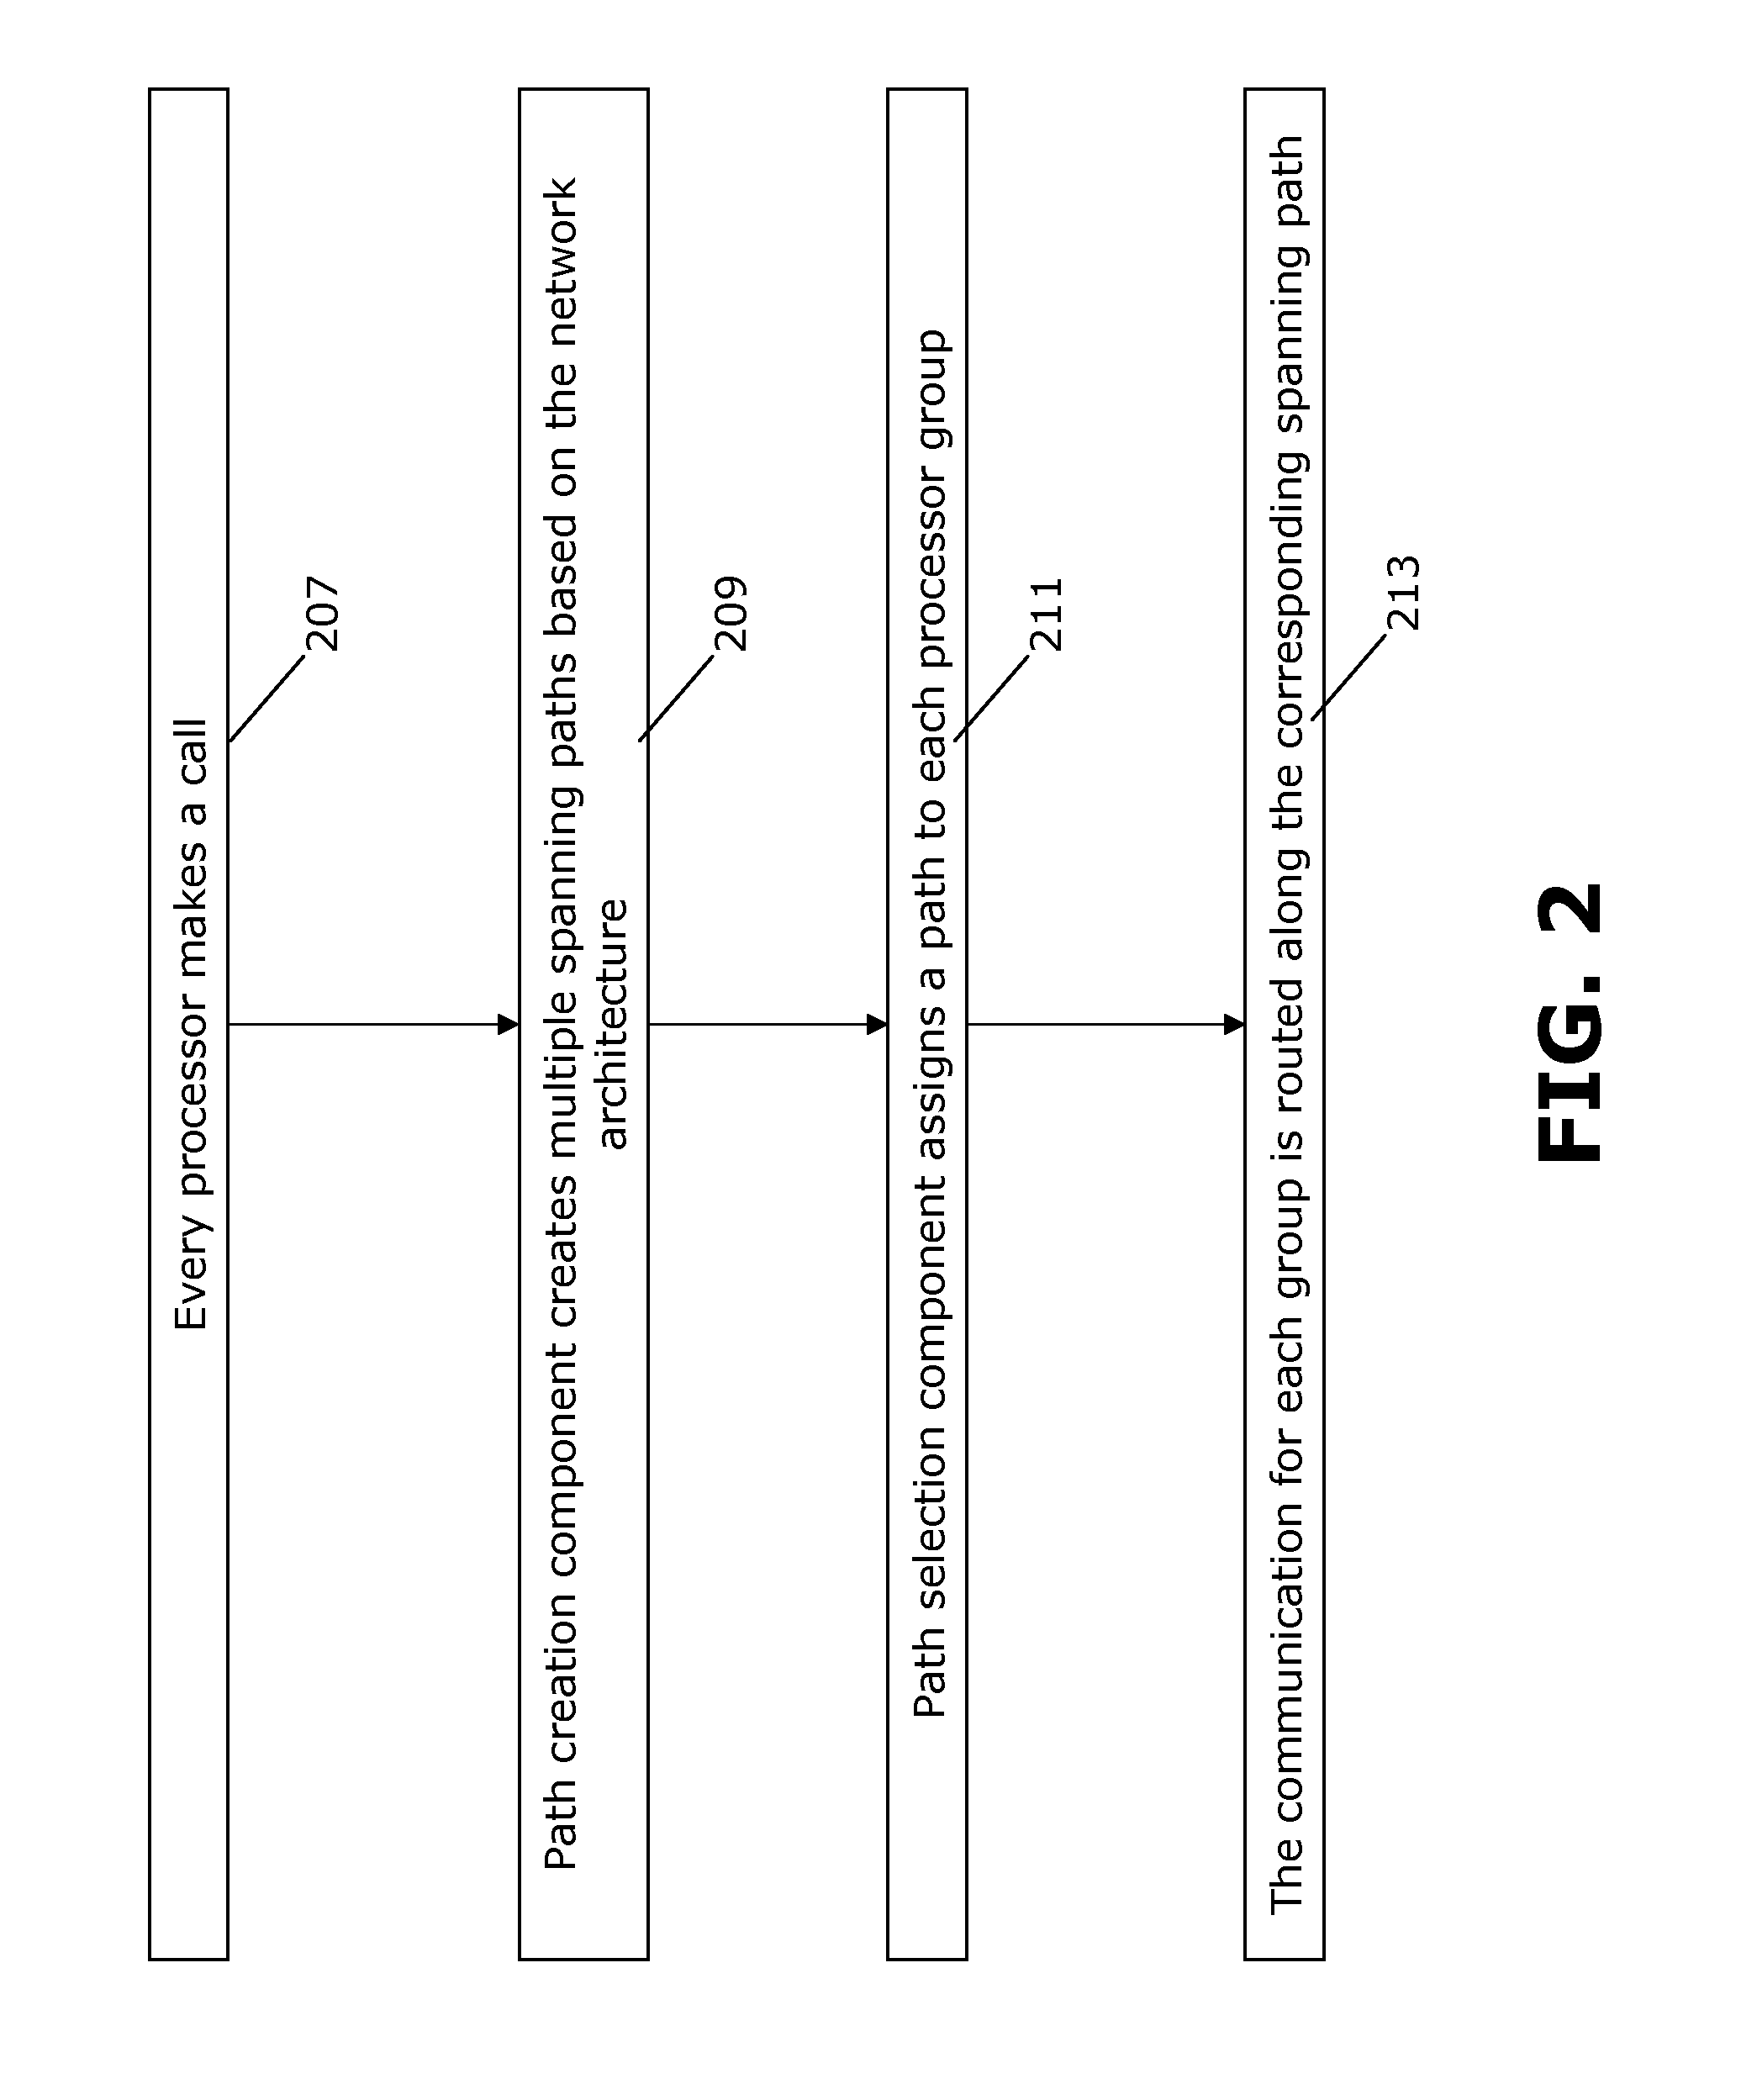 Performing synchronized collective operations over multiple process groups